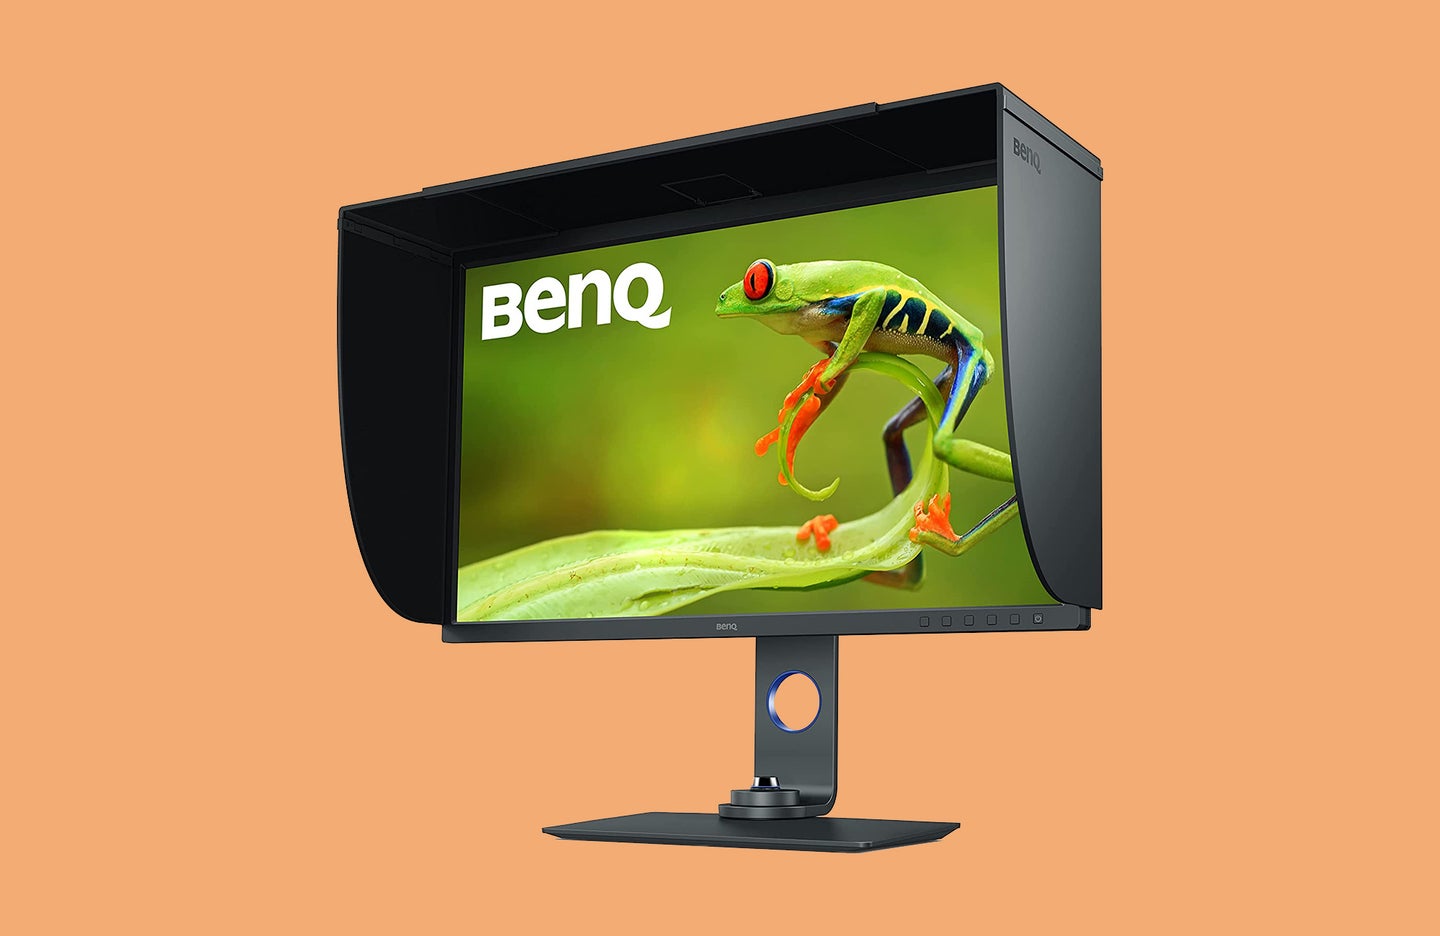 BenQ makes some of the best monitors for photo editing.